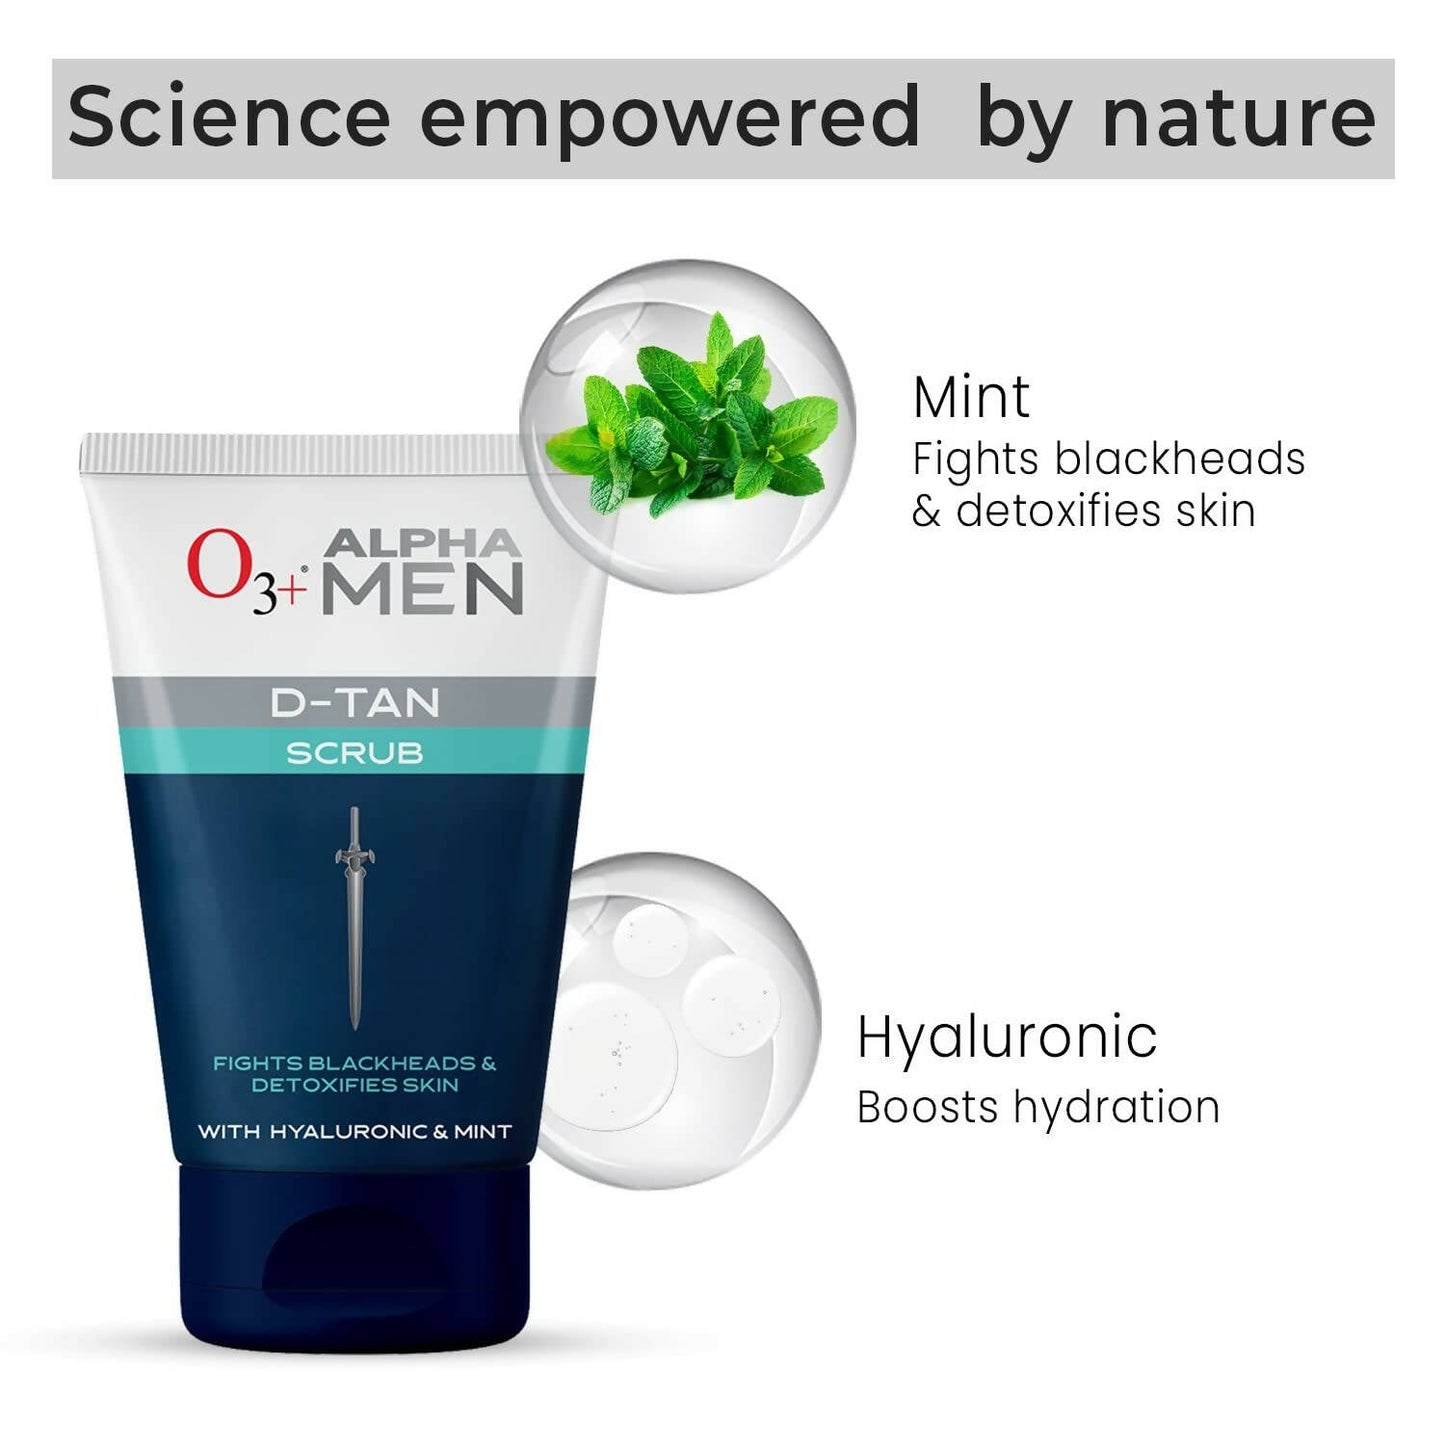 Professional O3+ Acno D-TAN Scrub With Hyaluronic & Mint